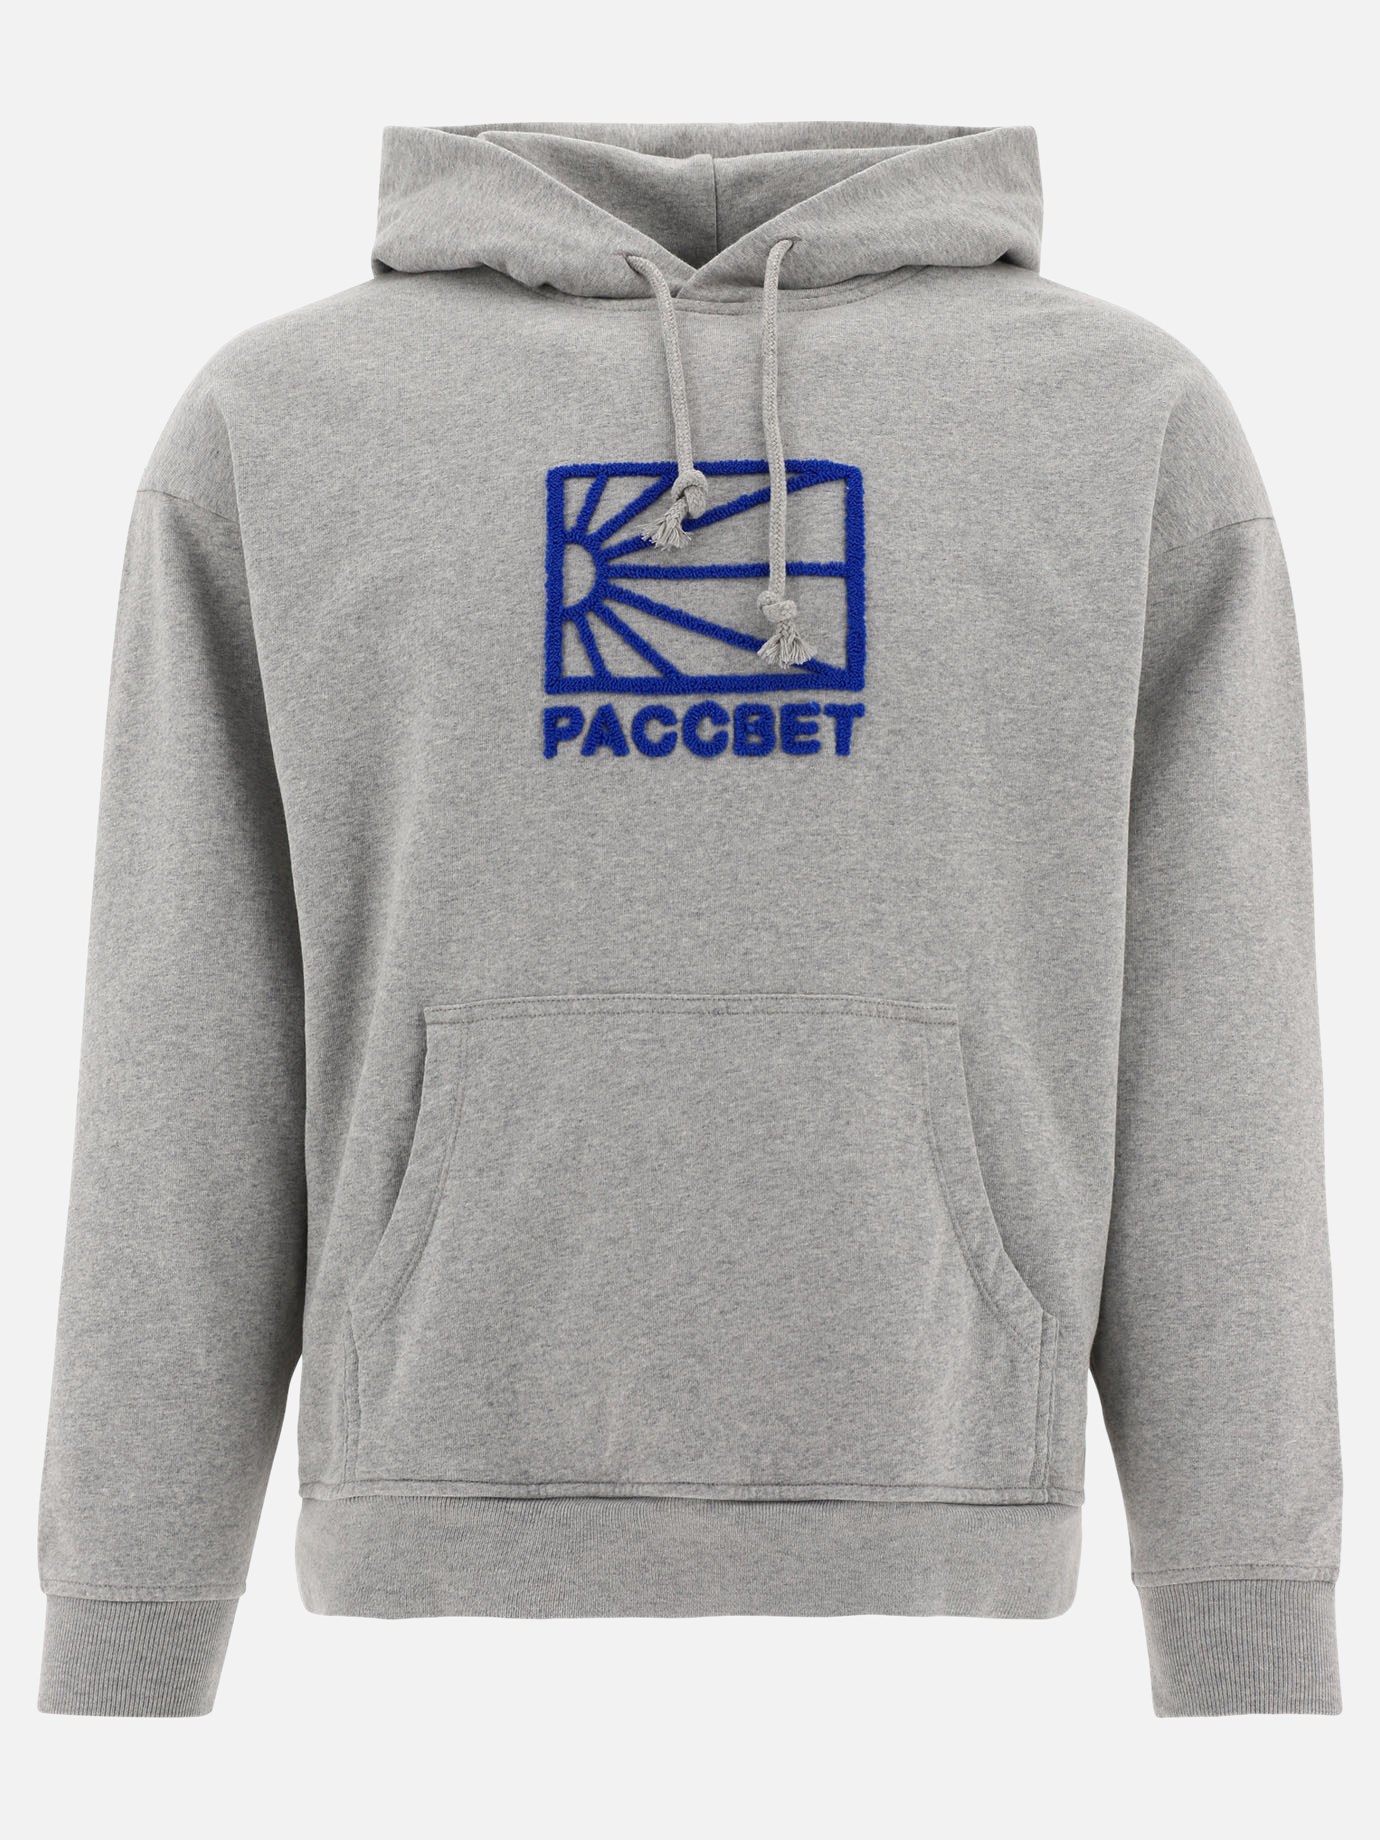 Sweatshirt with embroideryby Paccbet - 4